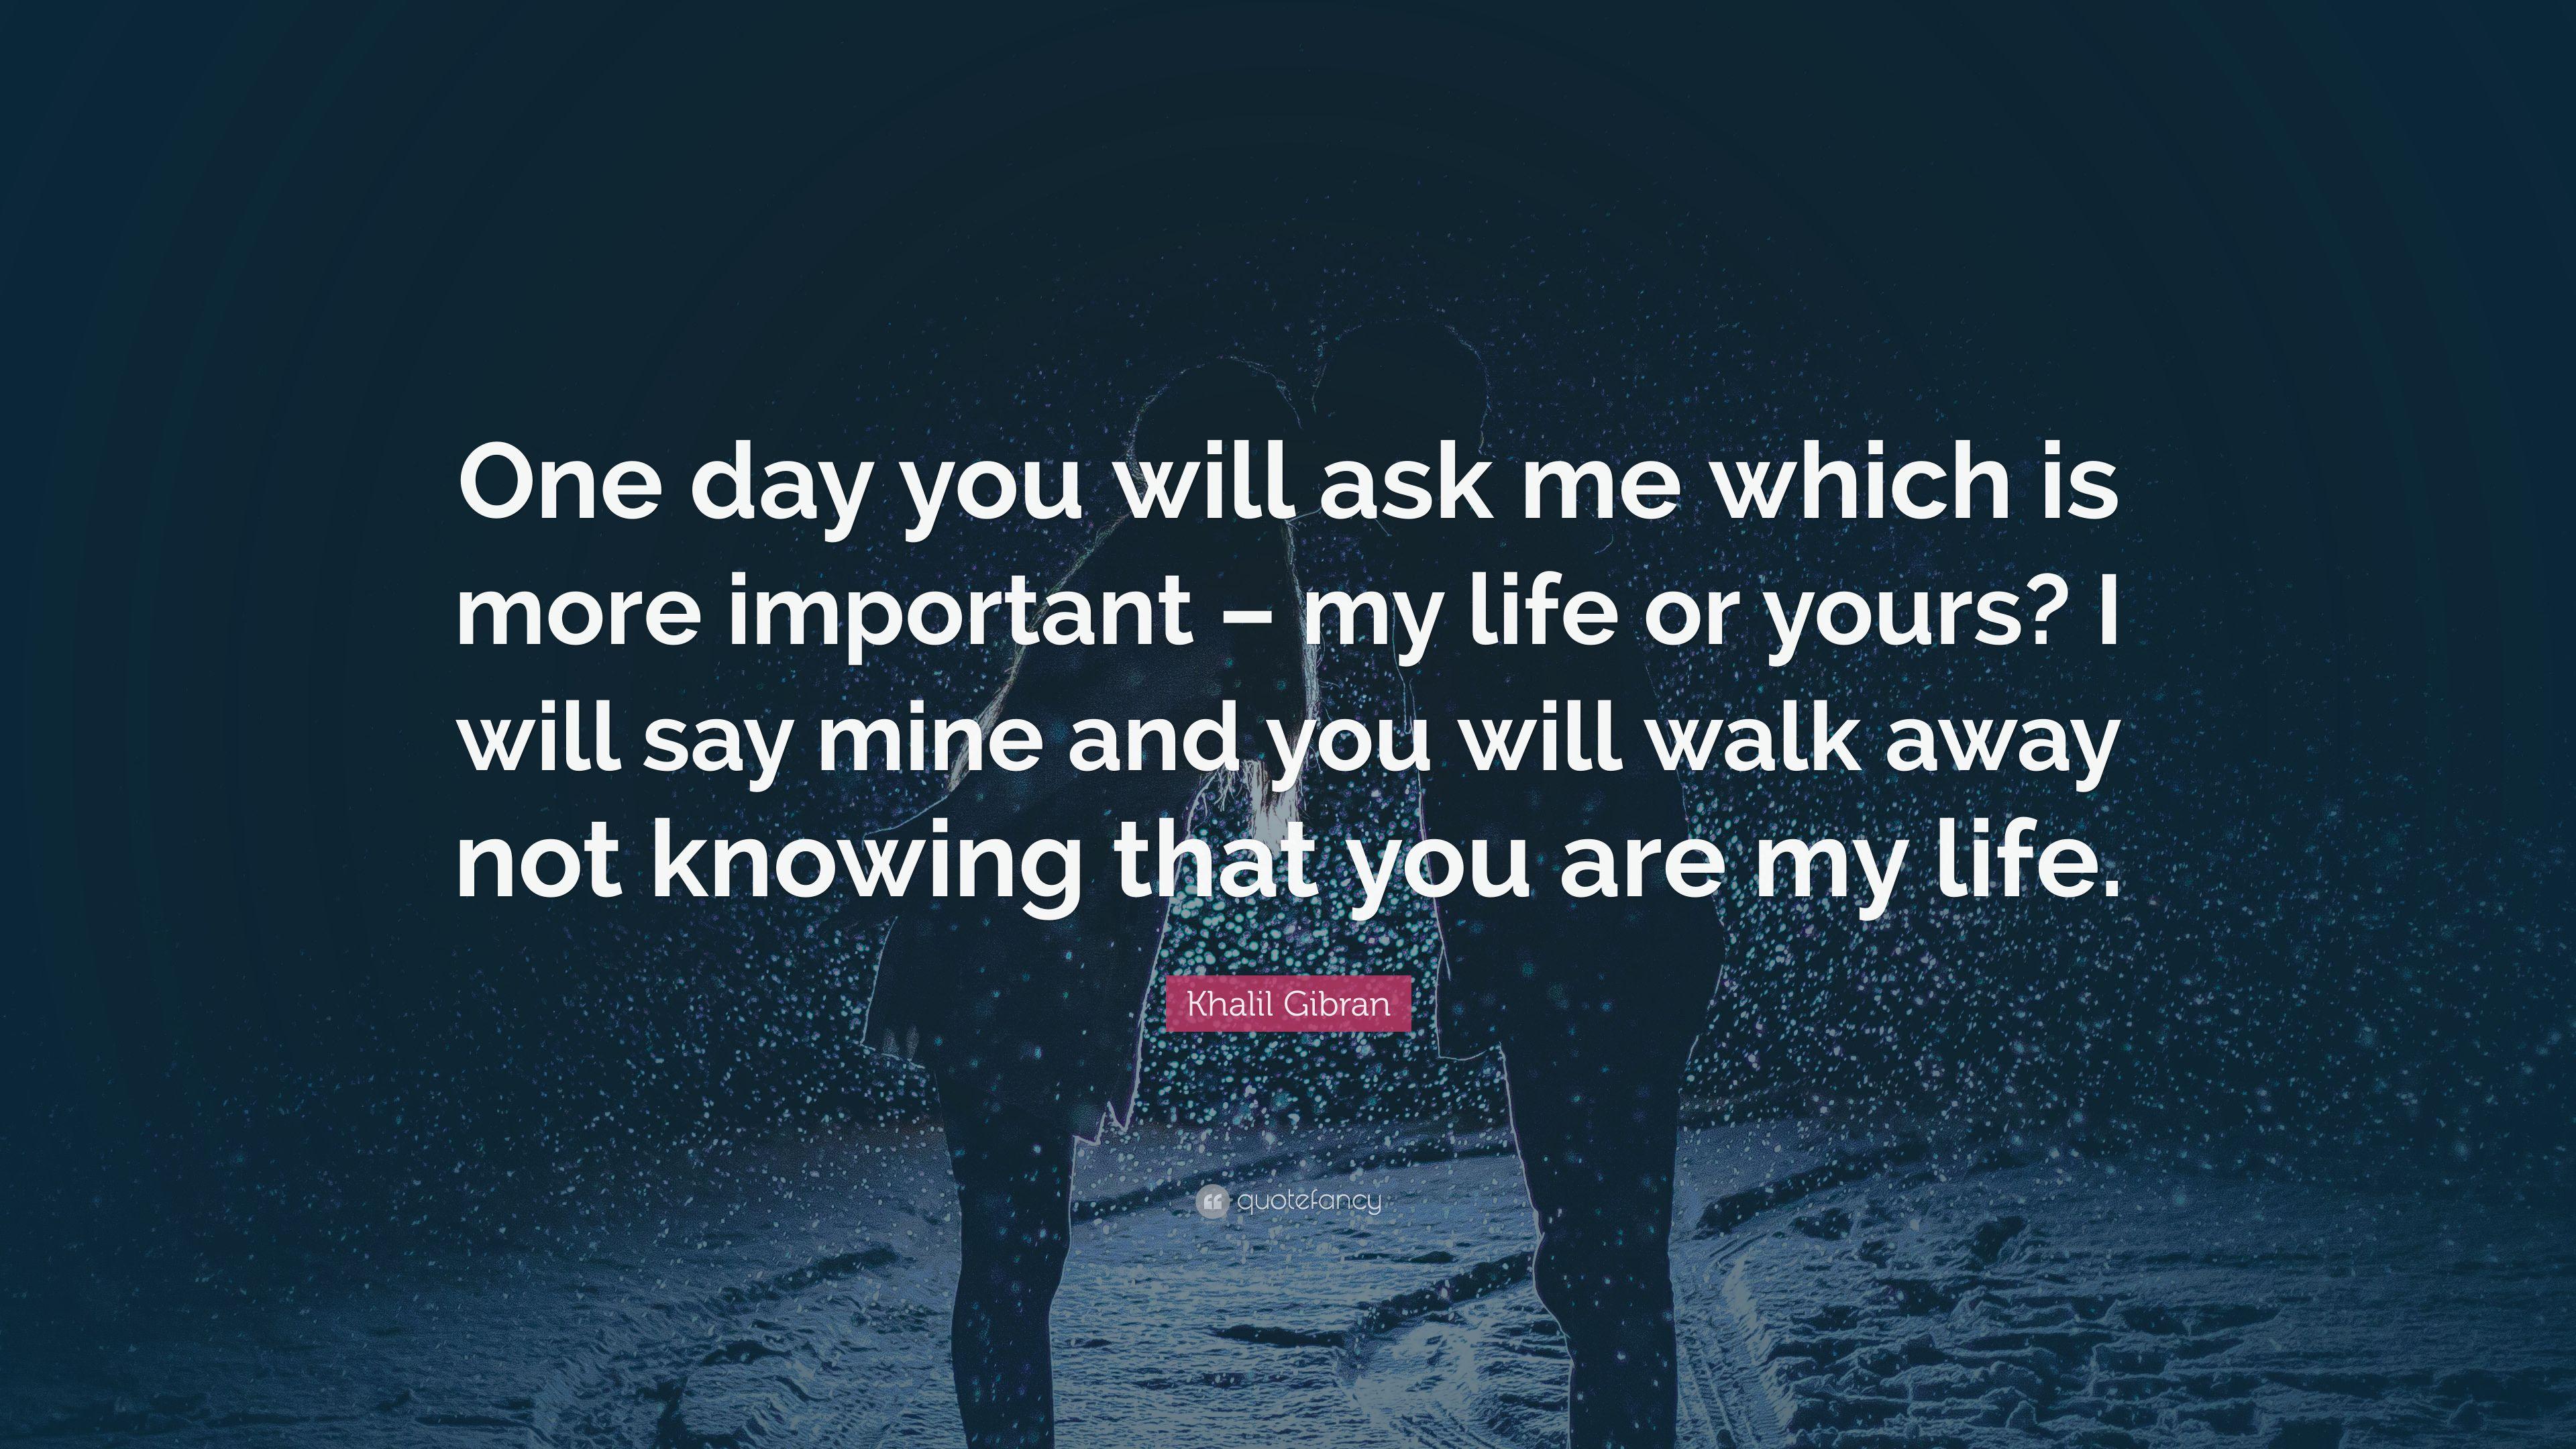 Khalil Gibran Quote: “One day you will ask me which is more important